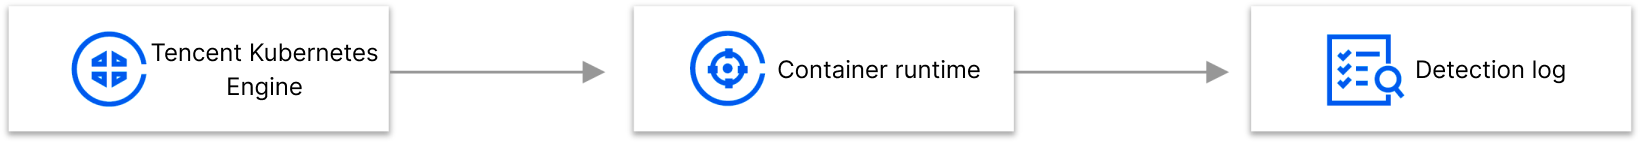 Container Runtime Security